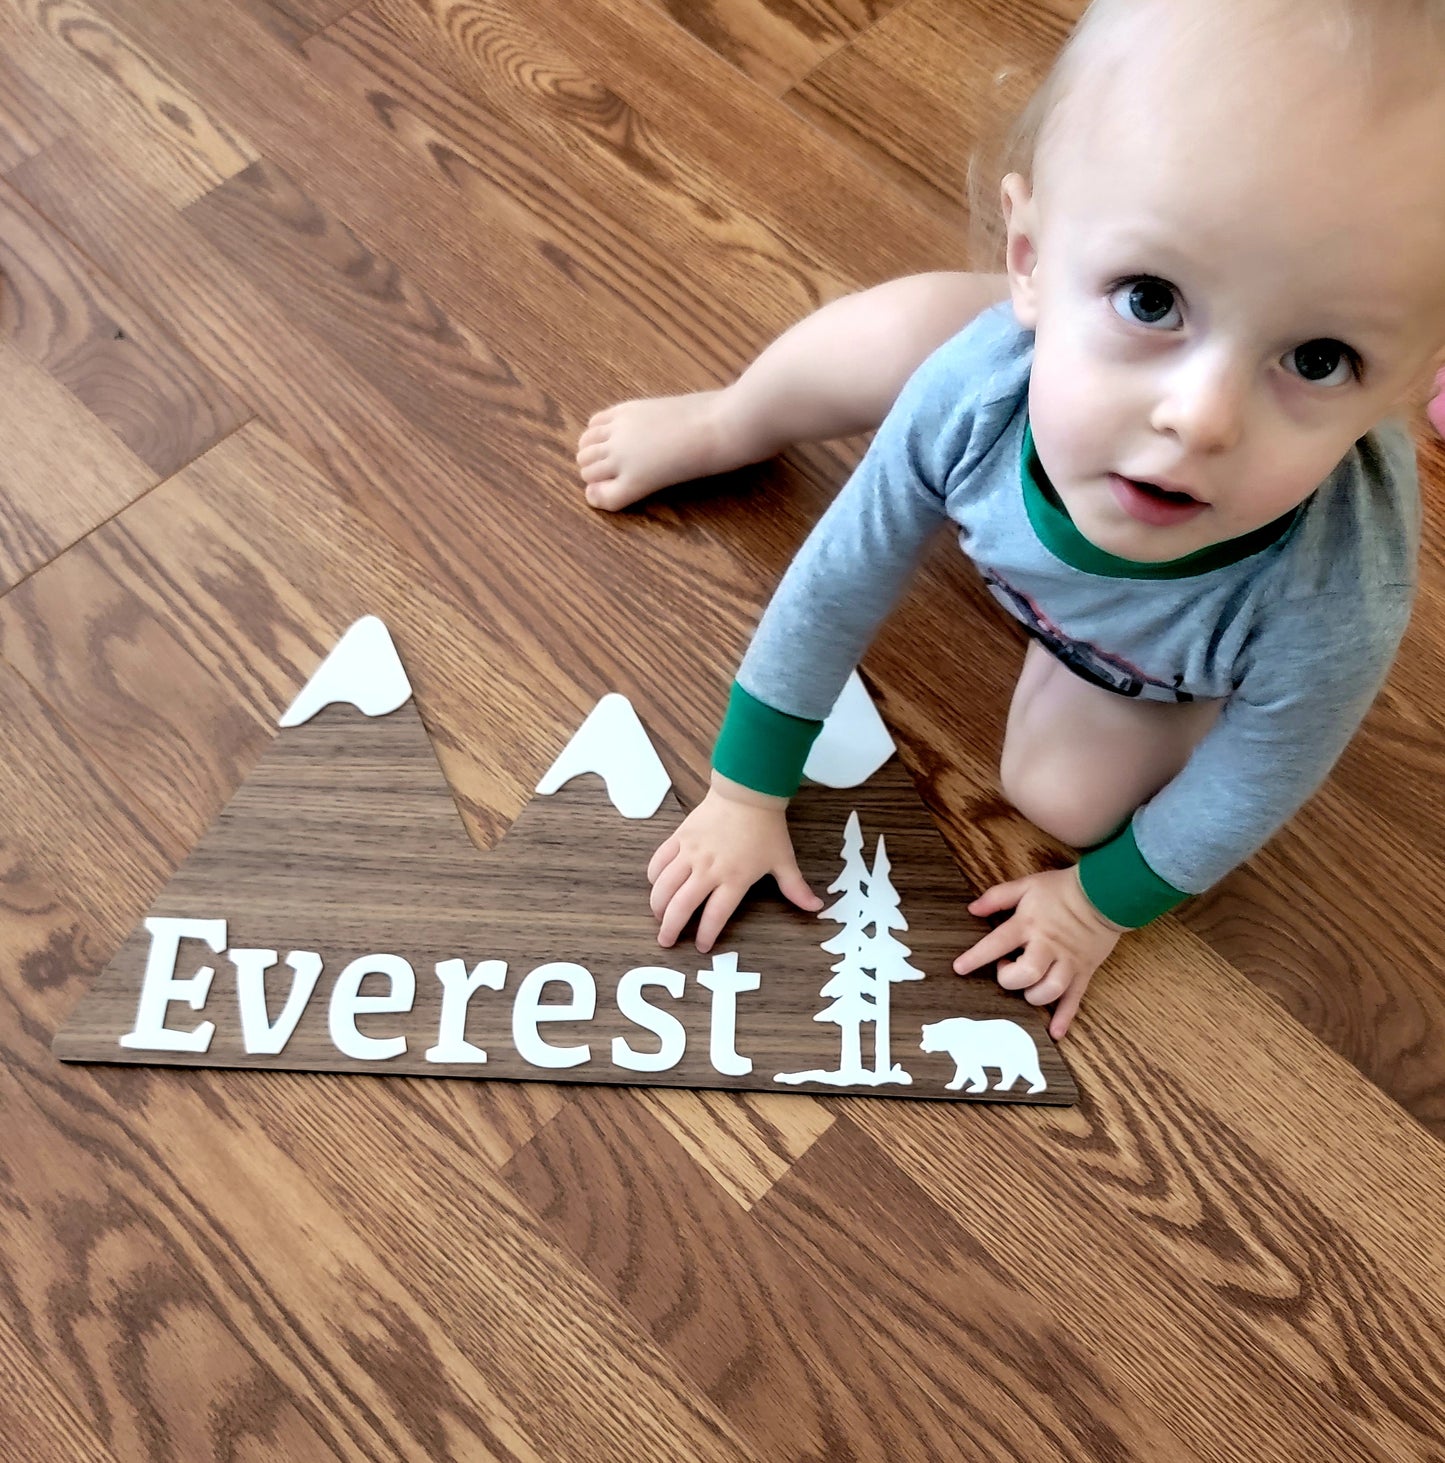 Mountains Personalized sign